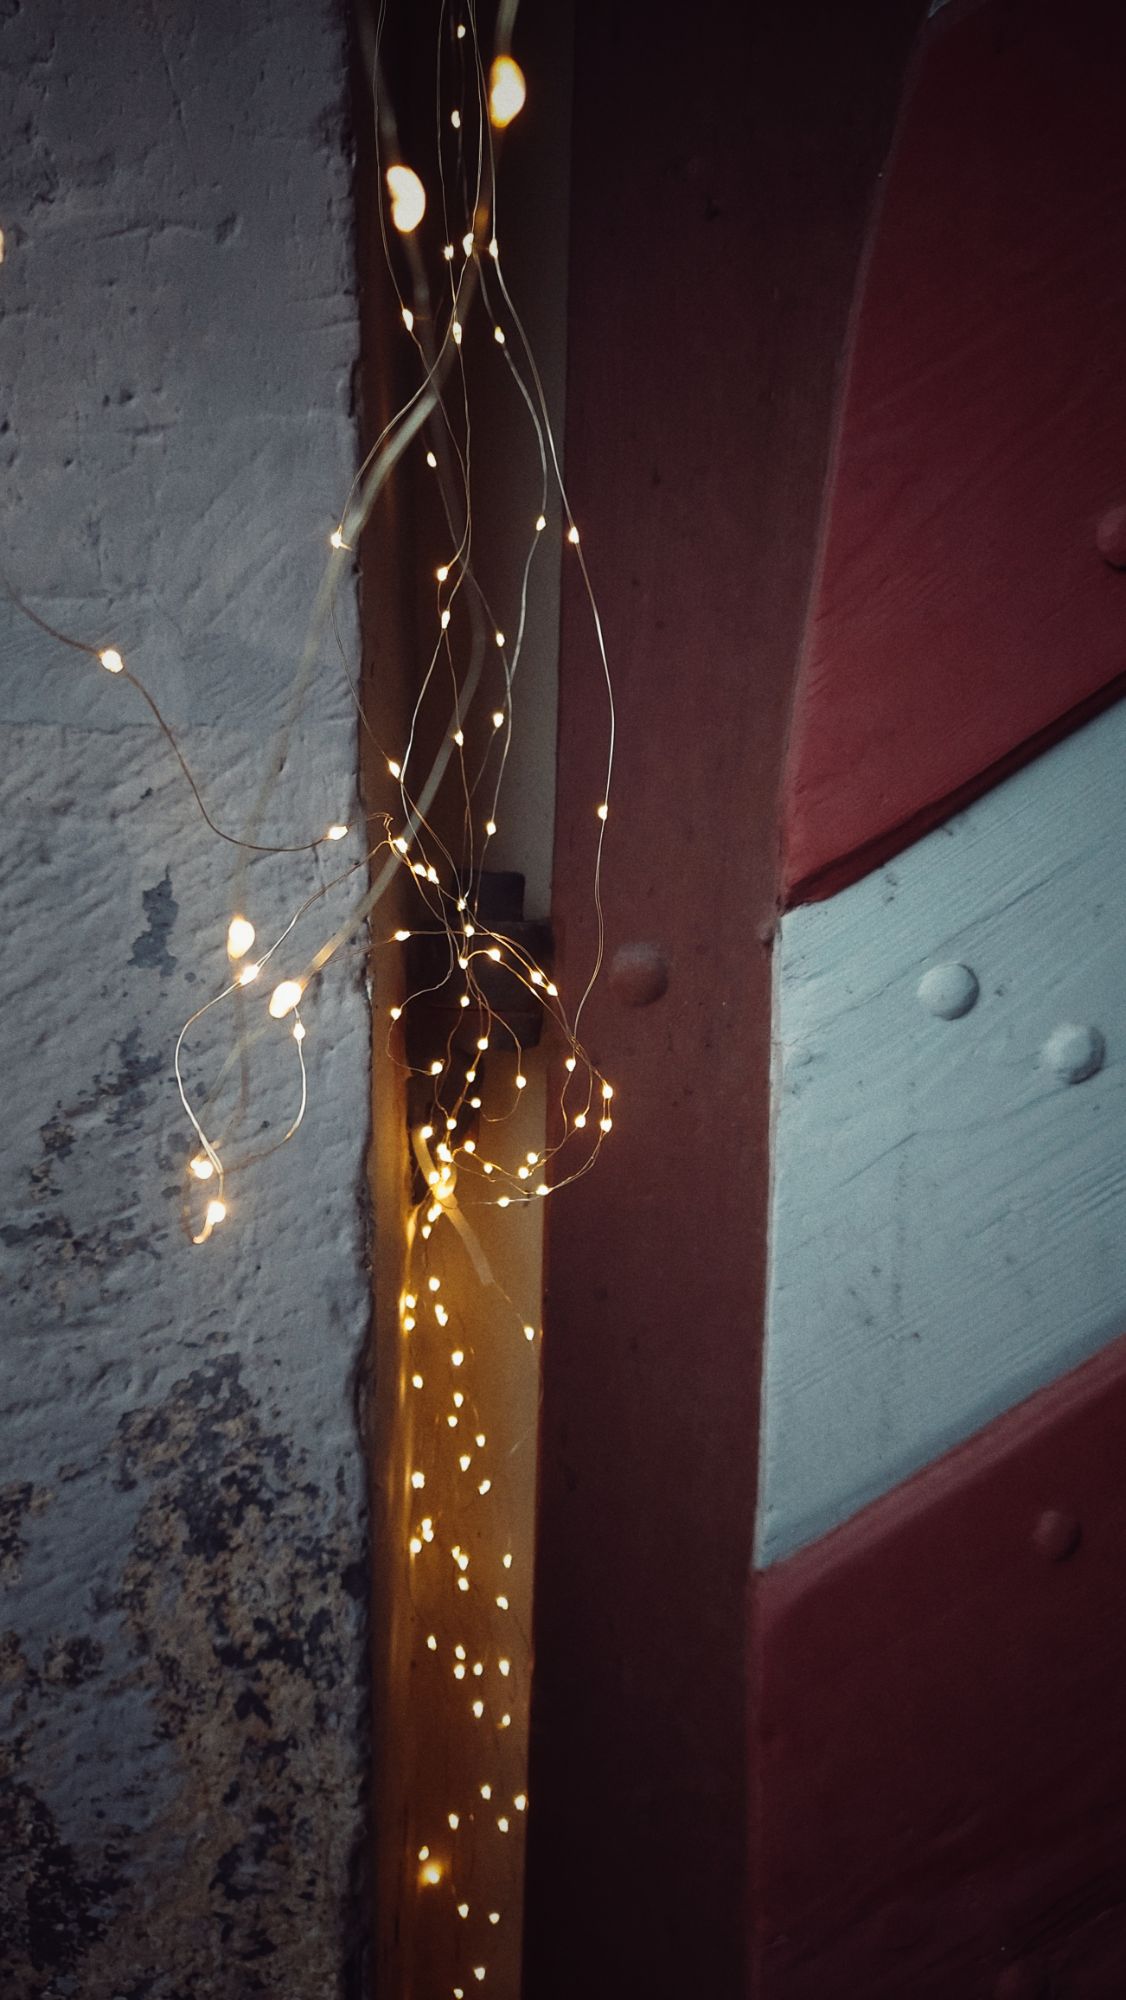 A chain of small lights hanging in between a wall and a red and white old door.